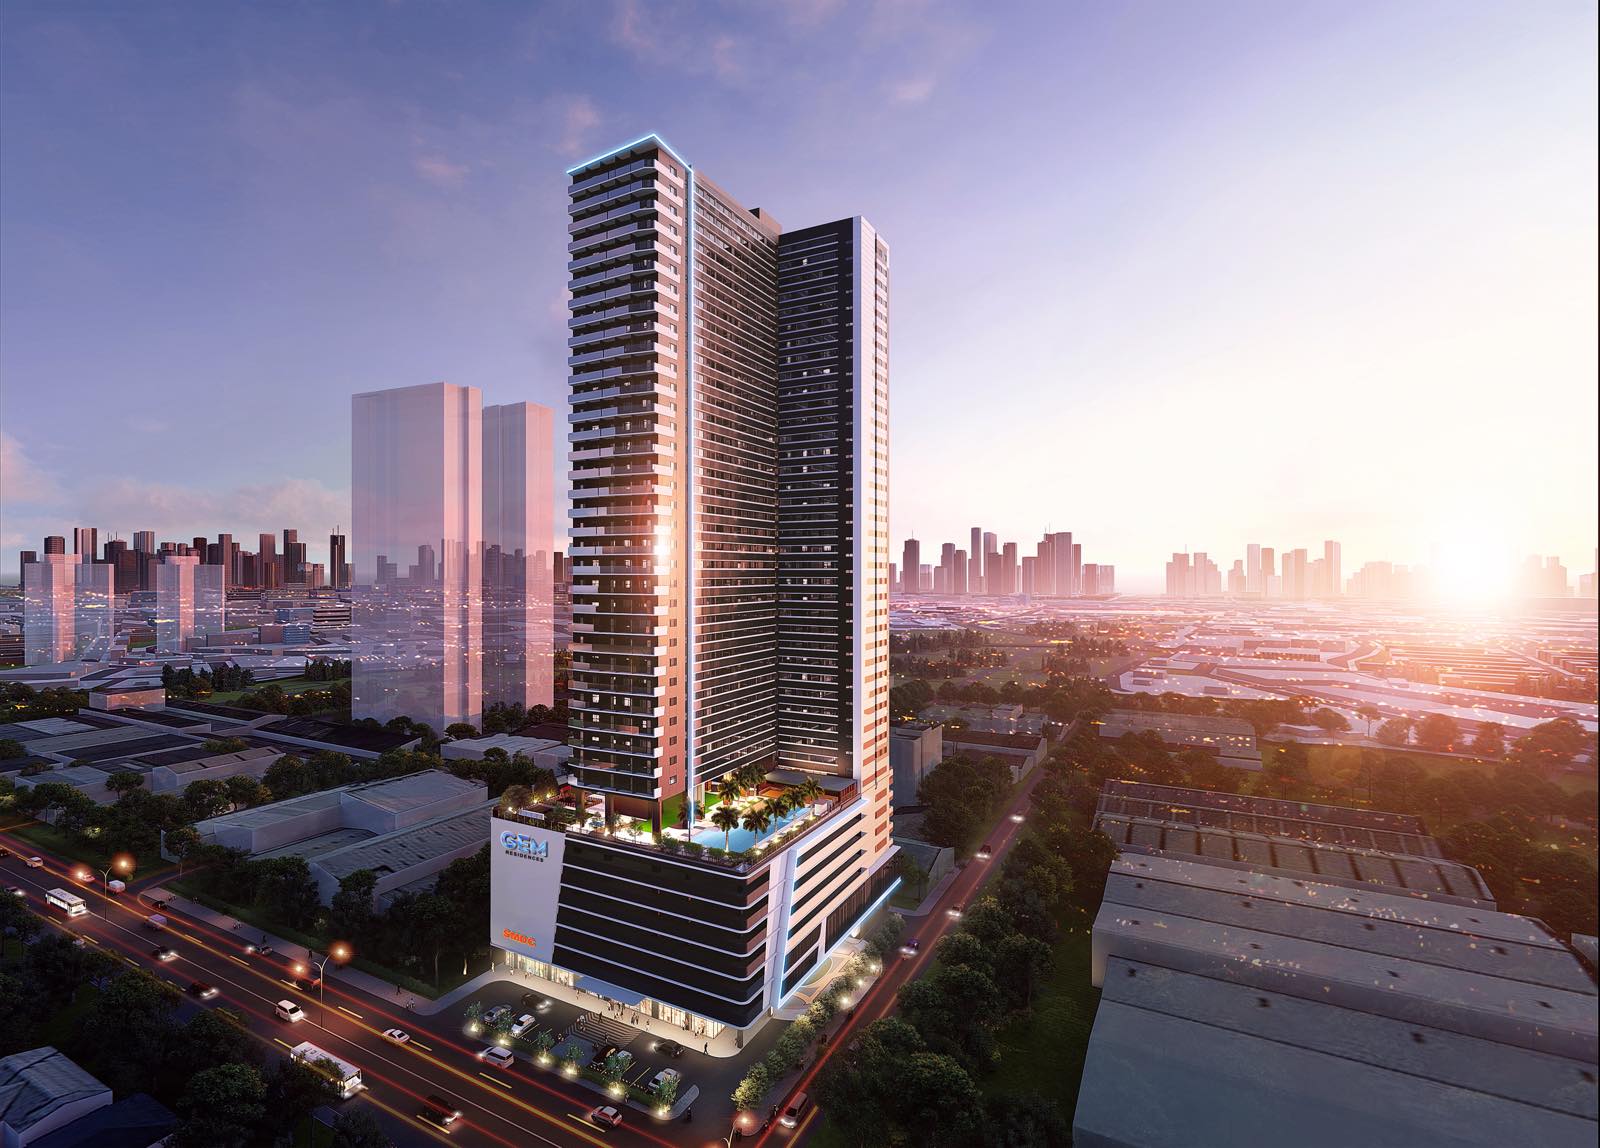 Achieve brilliance as SMDC expands footprint along C5 with Gem Residences